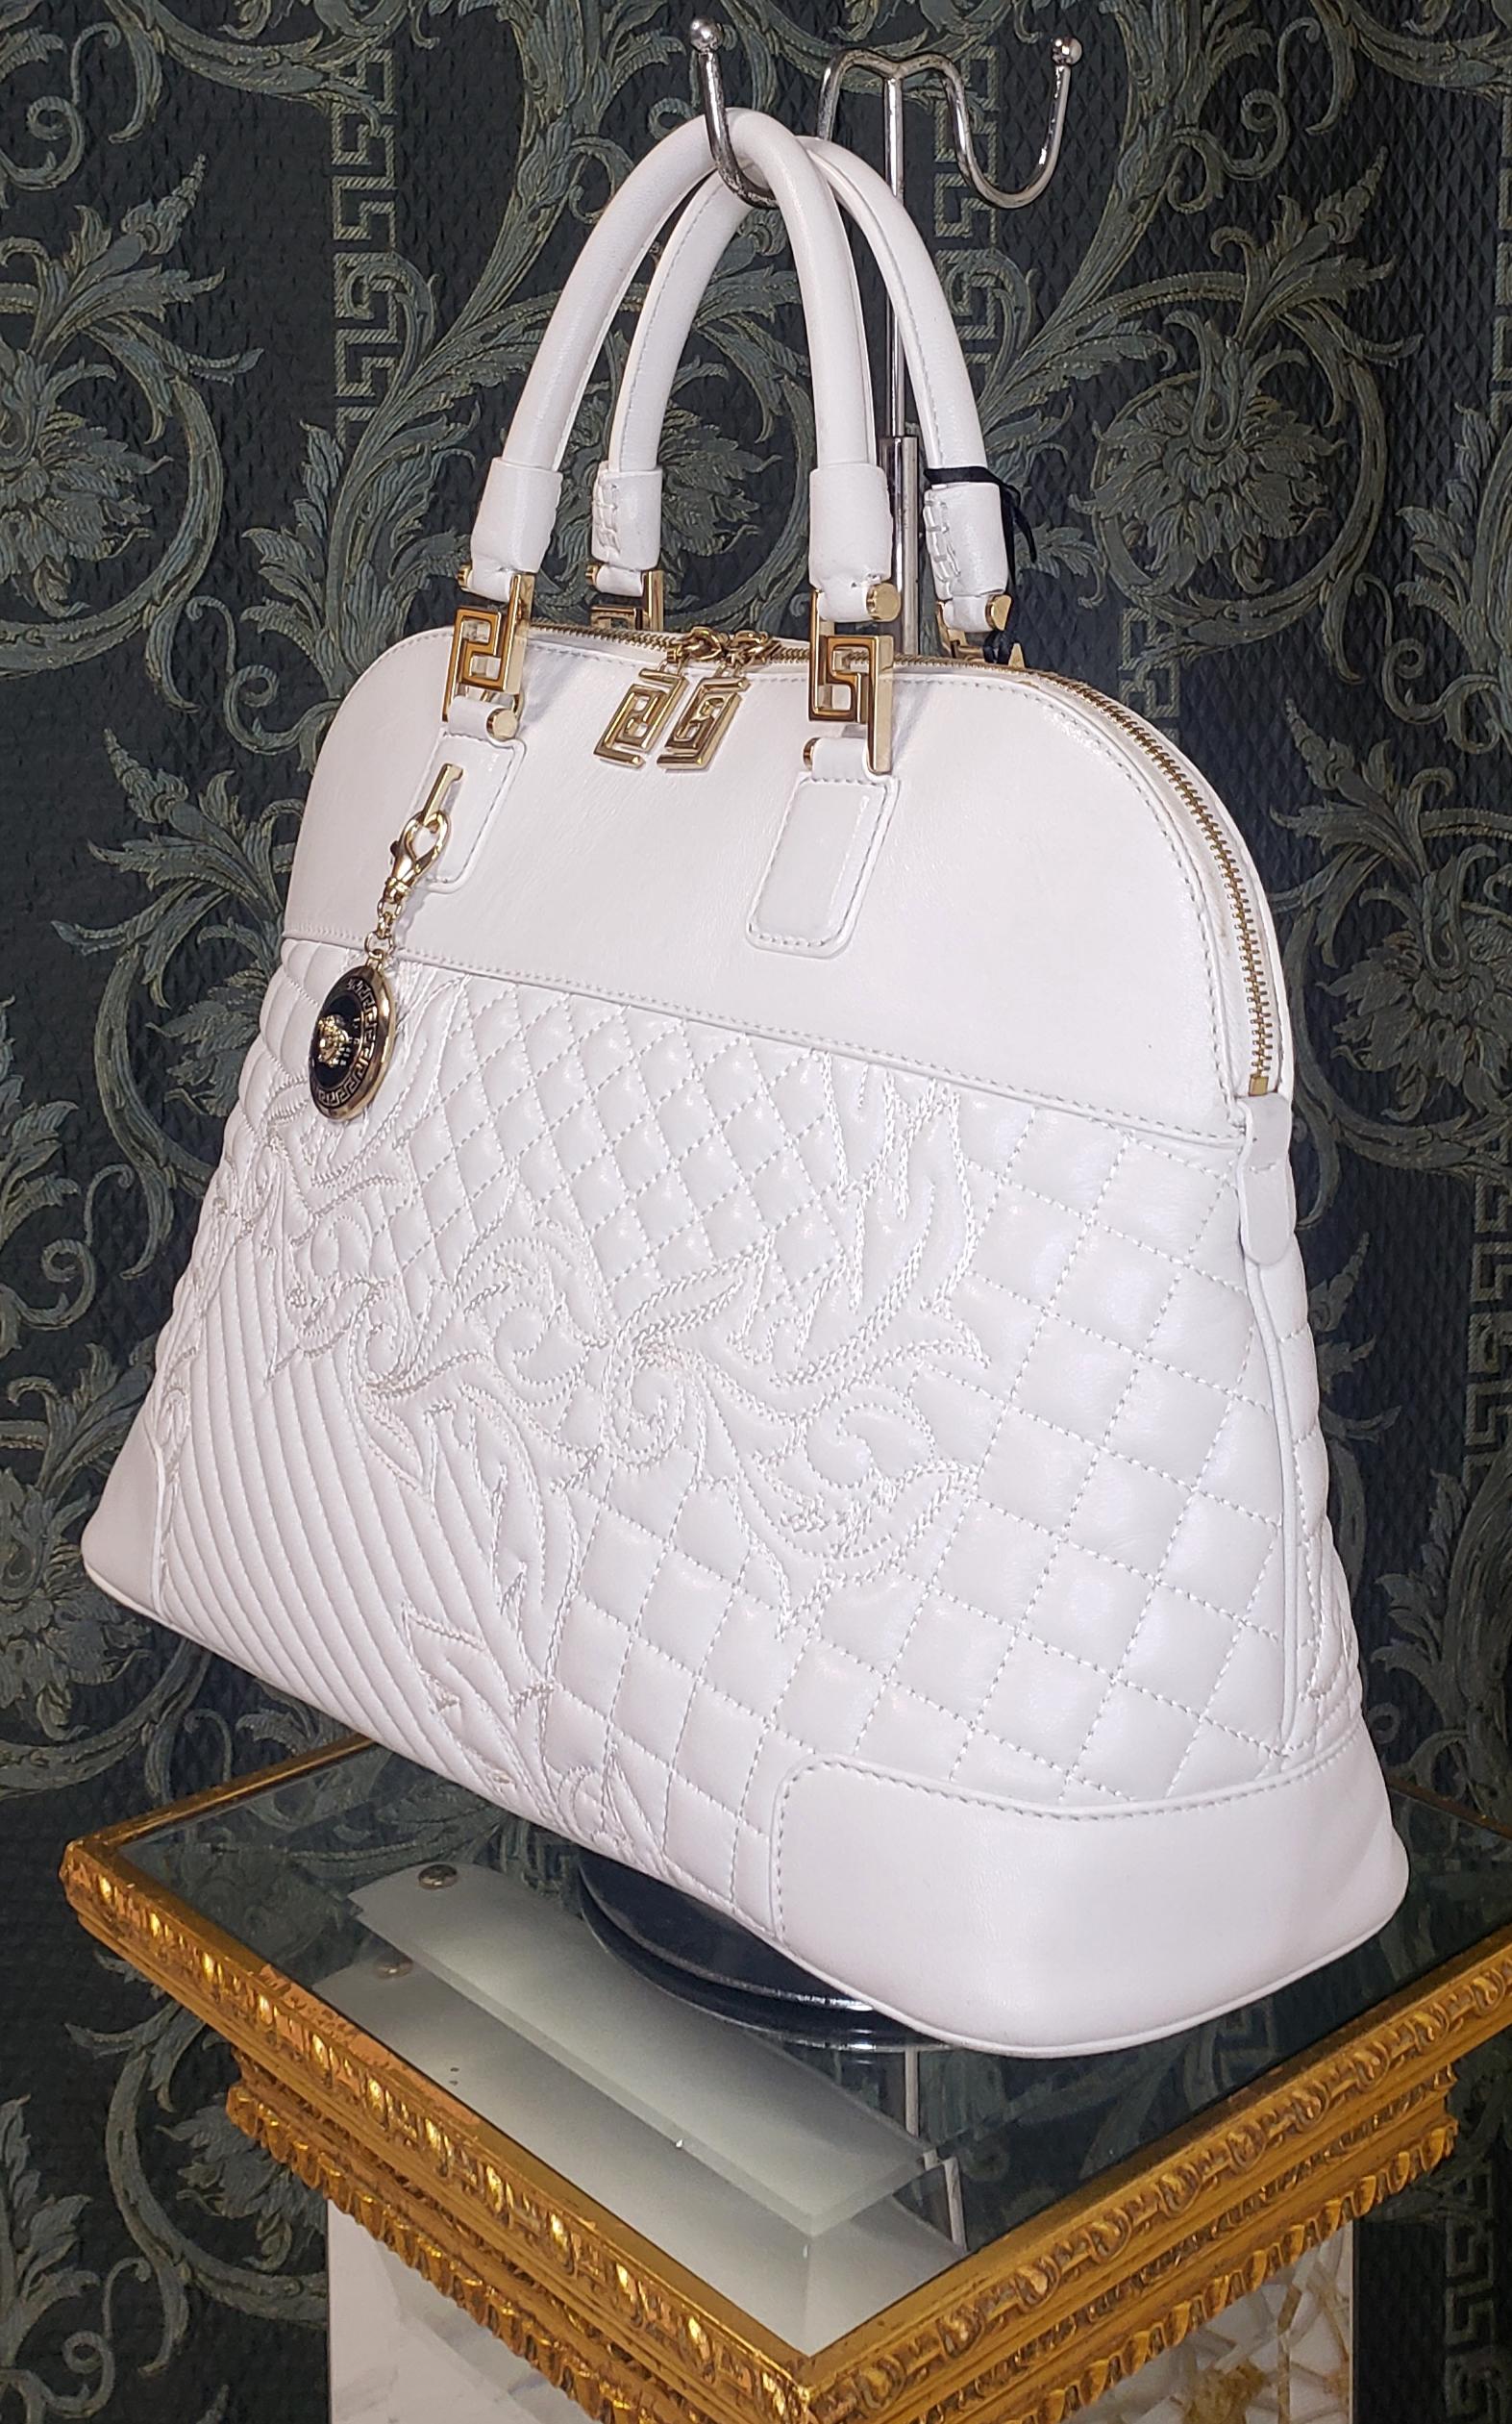 VERSACE


Quilting embosses this leather Versace handbag, 

which is punctuated with polished gold-tone hardware

satin interior includes 3 pockets

Gold Medusa medallion 

Baroque print lining 

detachable shoulder straps, top zip fastening

15